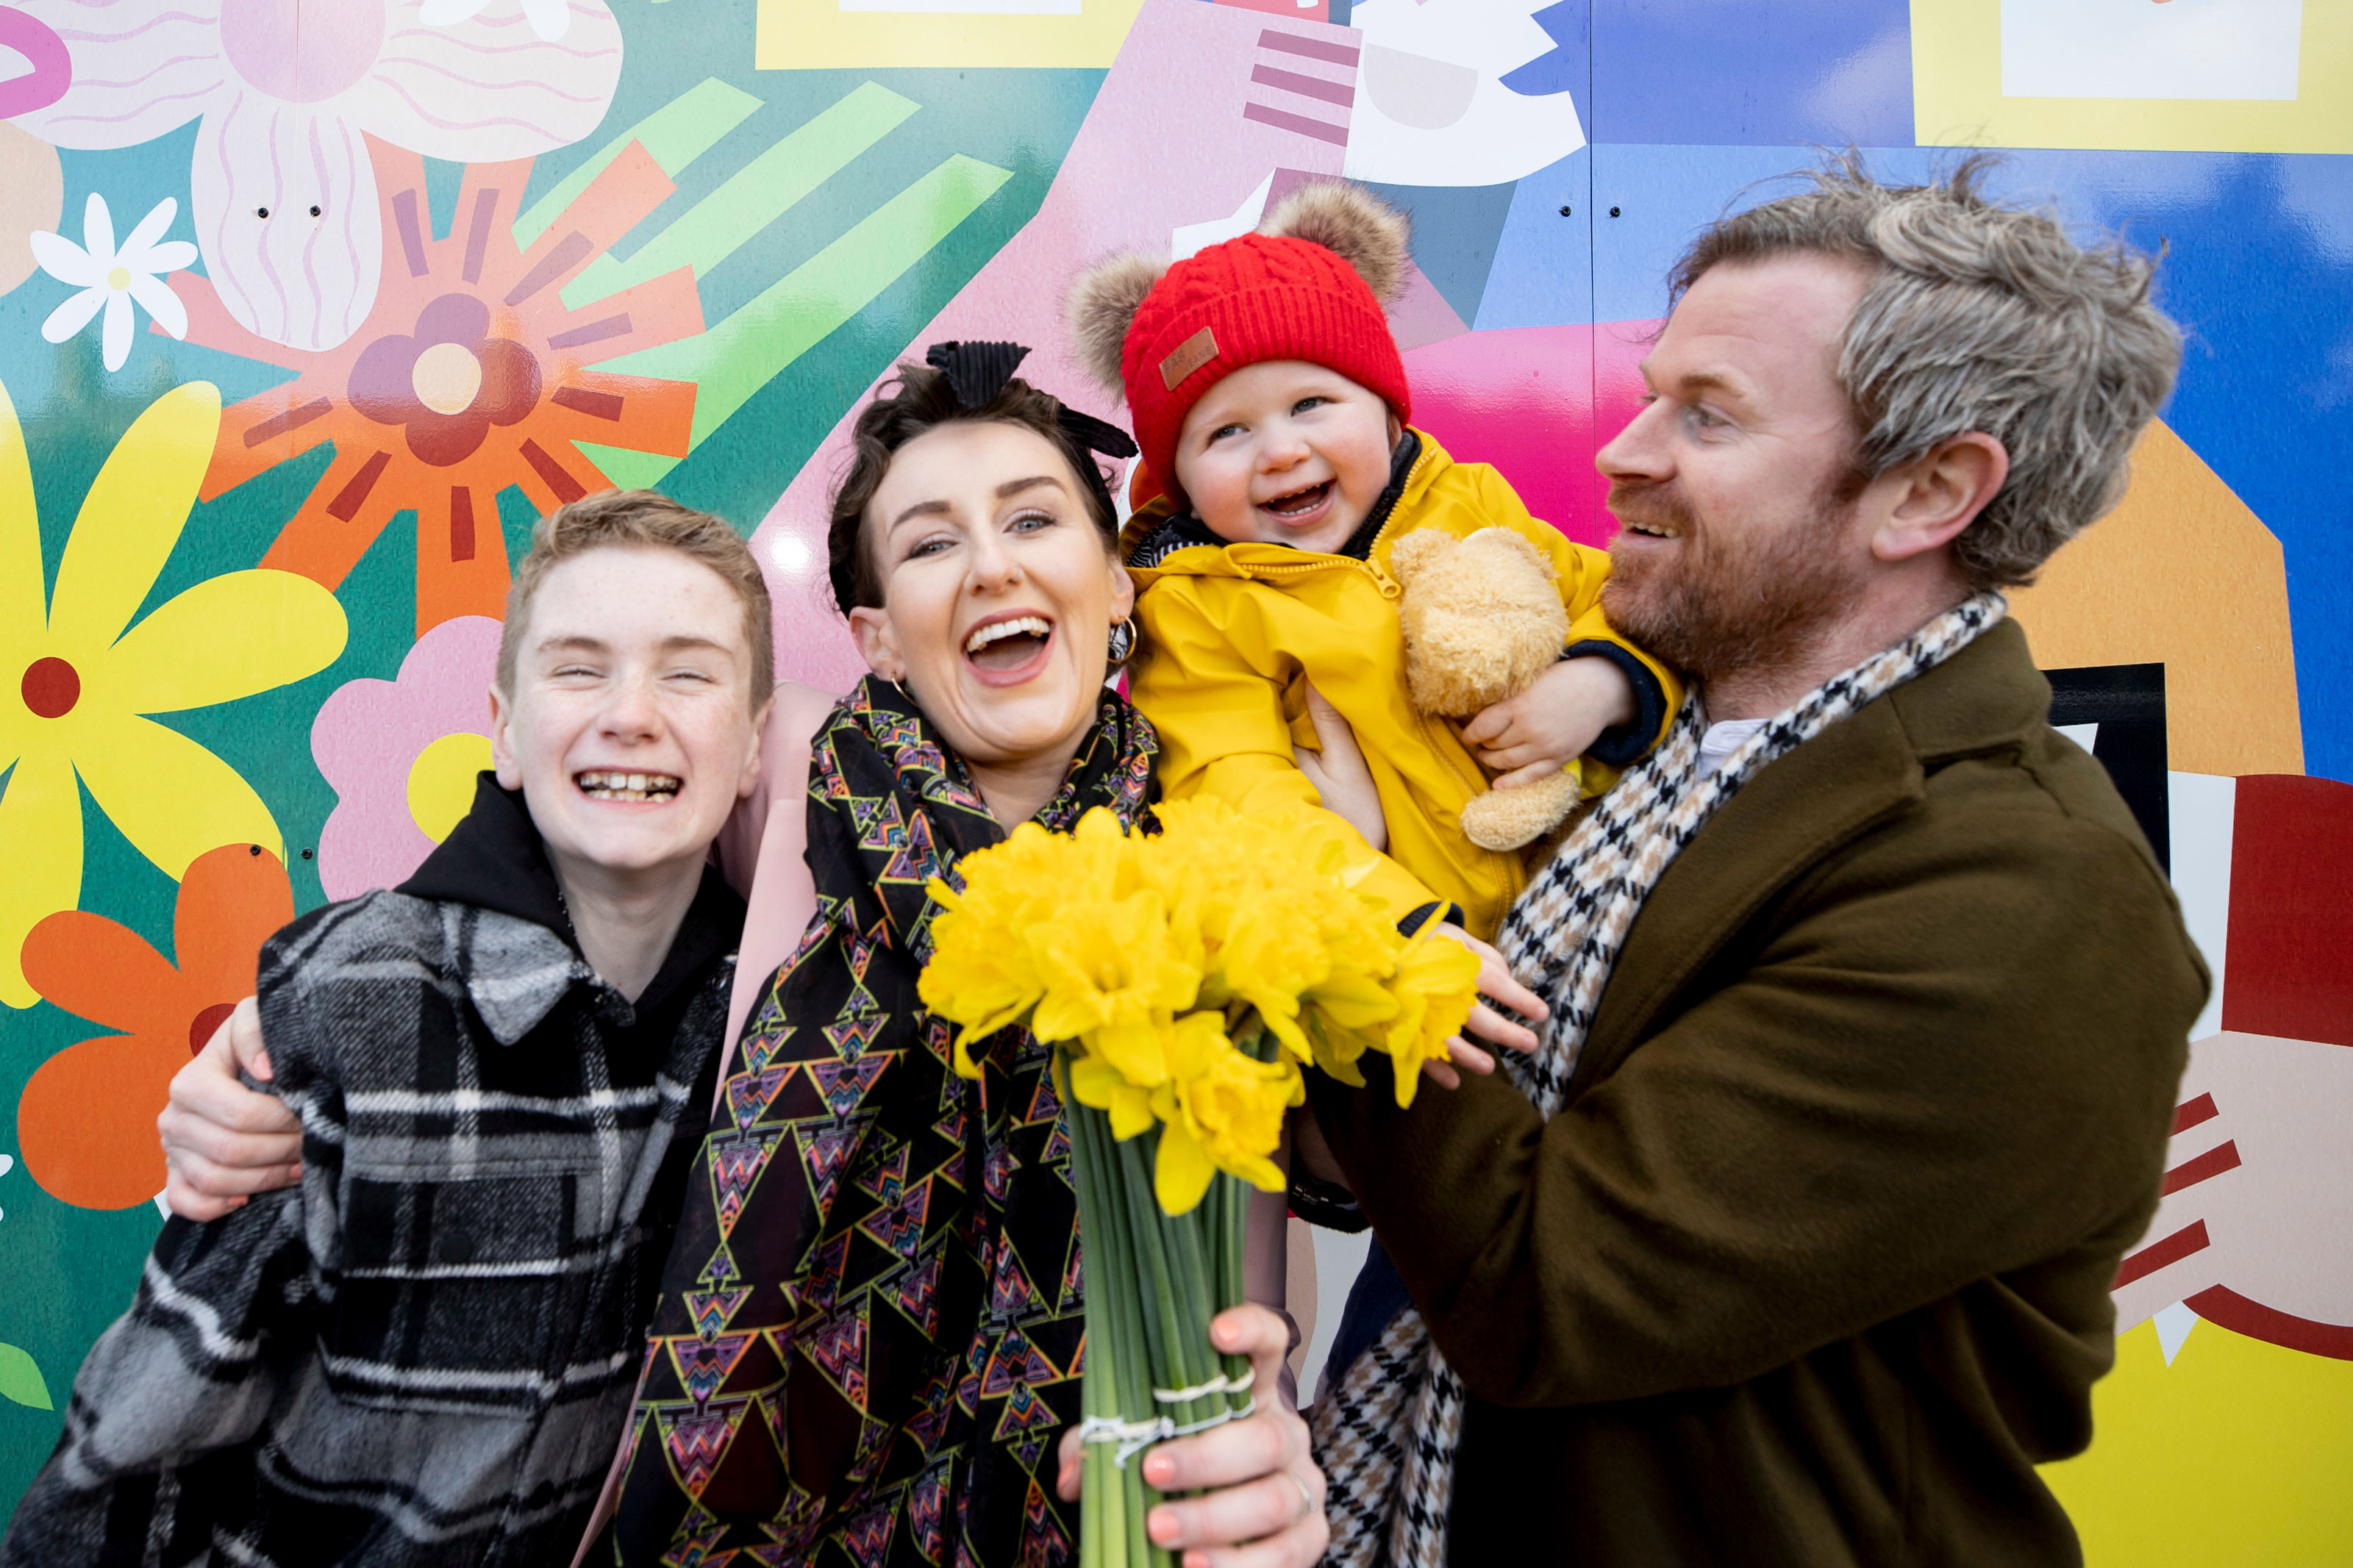 Donna-Marie Cullen with her family Sean (12), Max (2) and fiancé Colin O ’Dwyer.